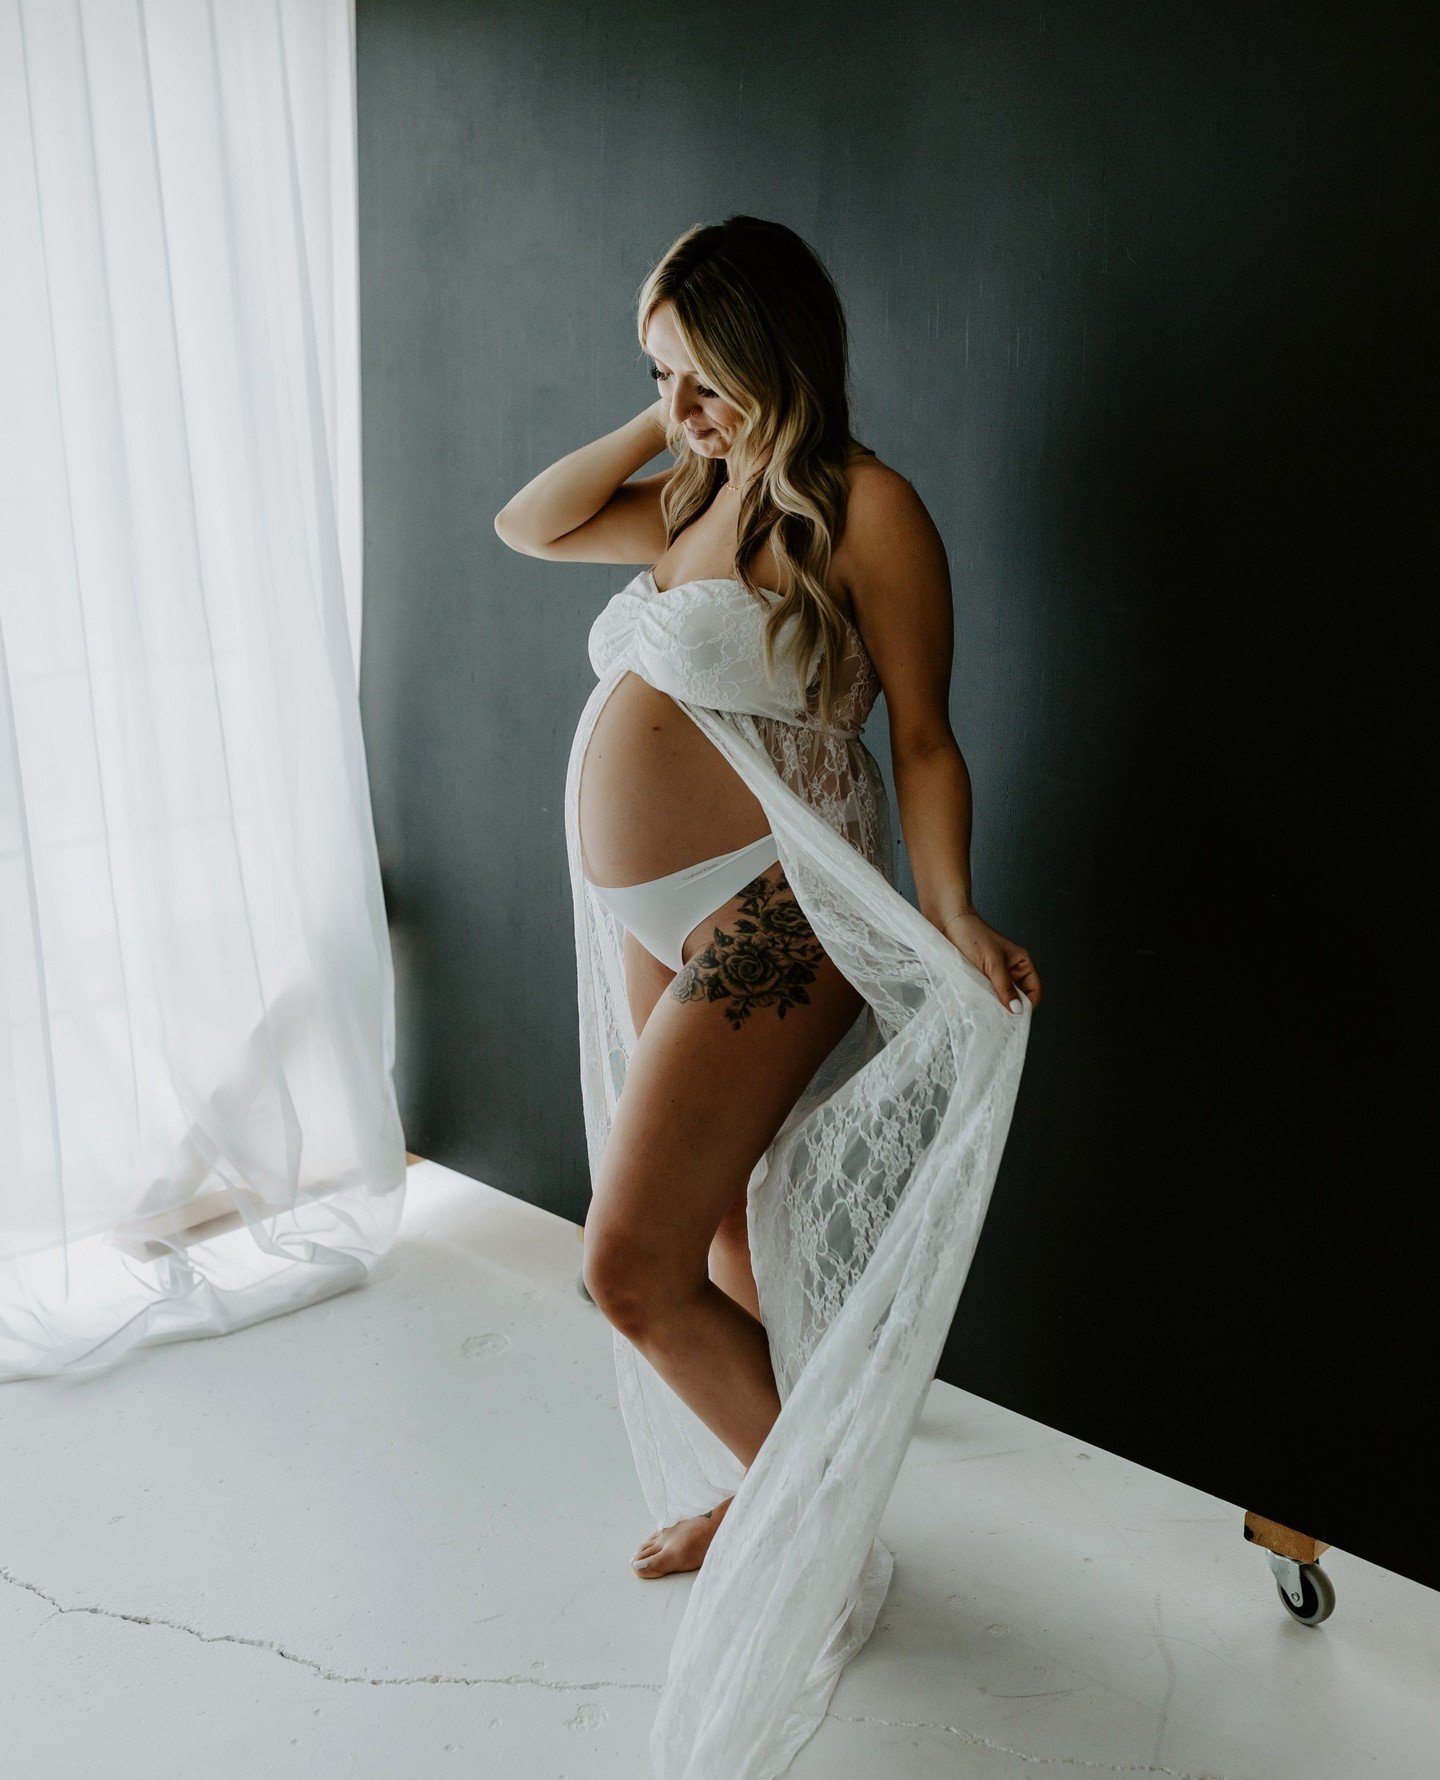 Stepping out of our comfort zone wrapped in nothing but confidence ✨ This fearless babe embraced her inner queen, totally owning her boudoir maternity session. Here's to celebrating every inch of our story, our strength, and our skin. Because, why no